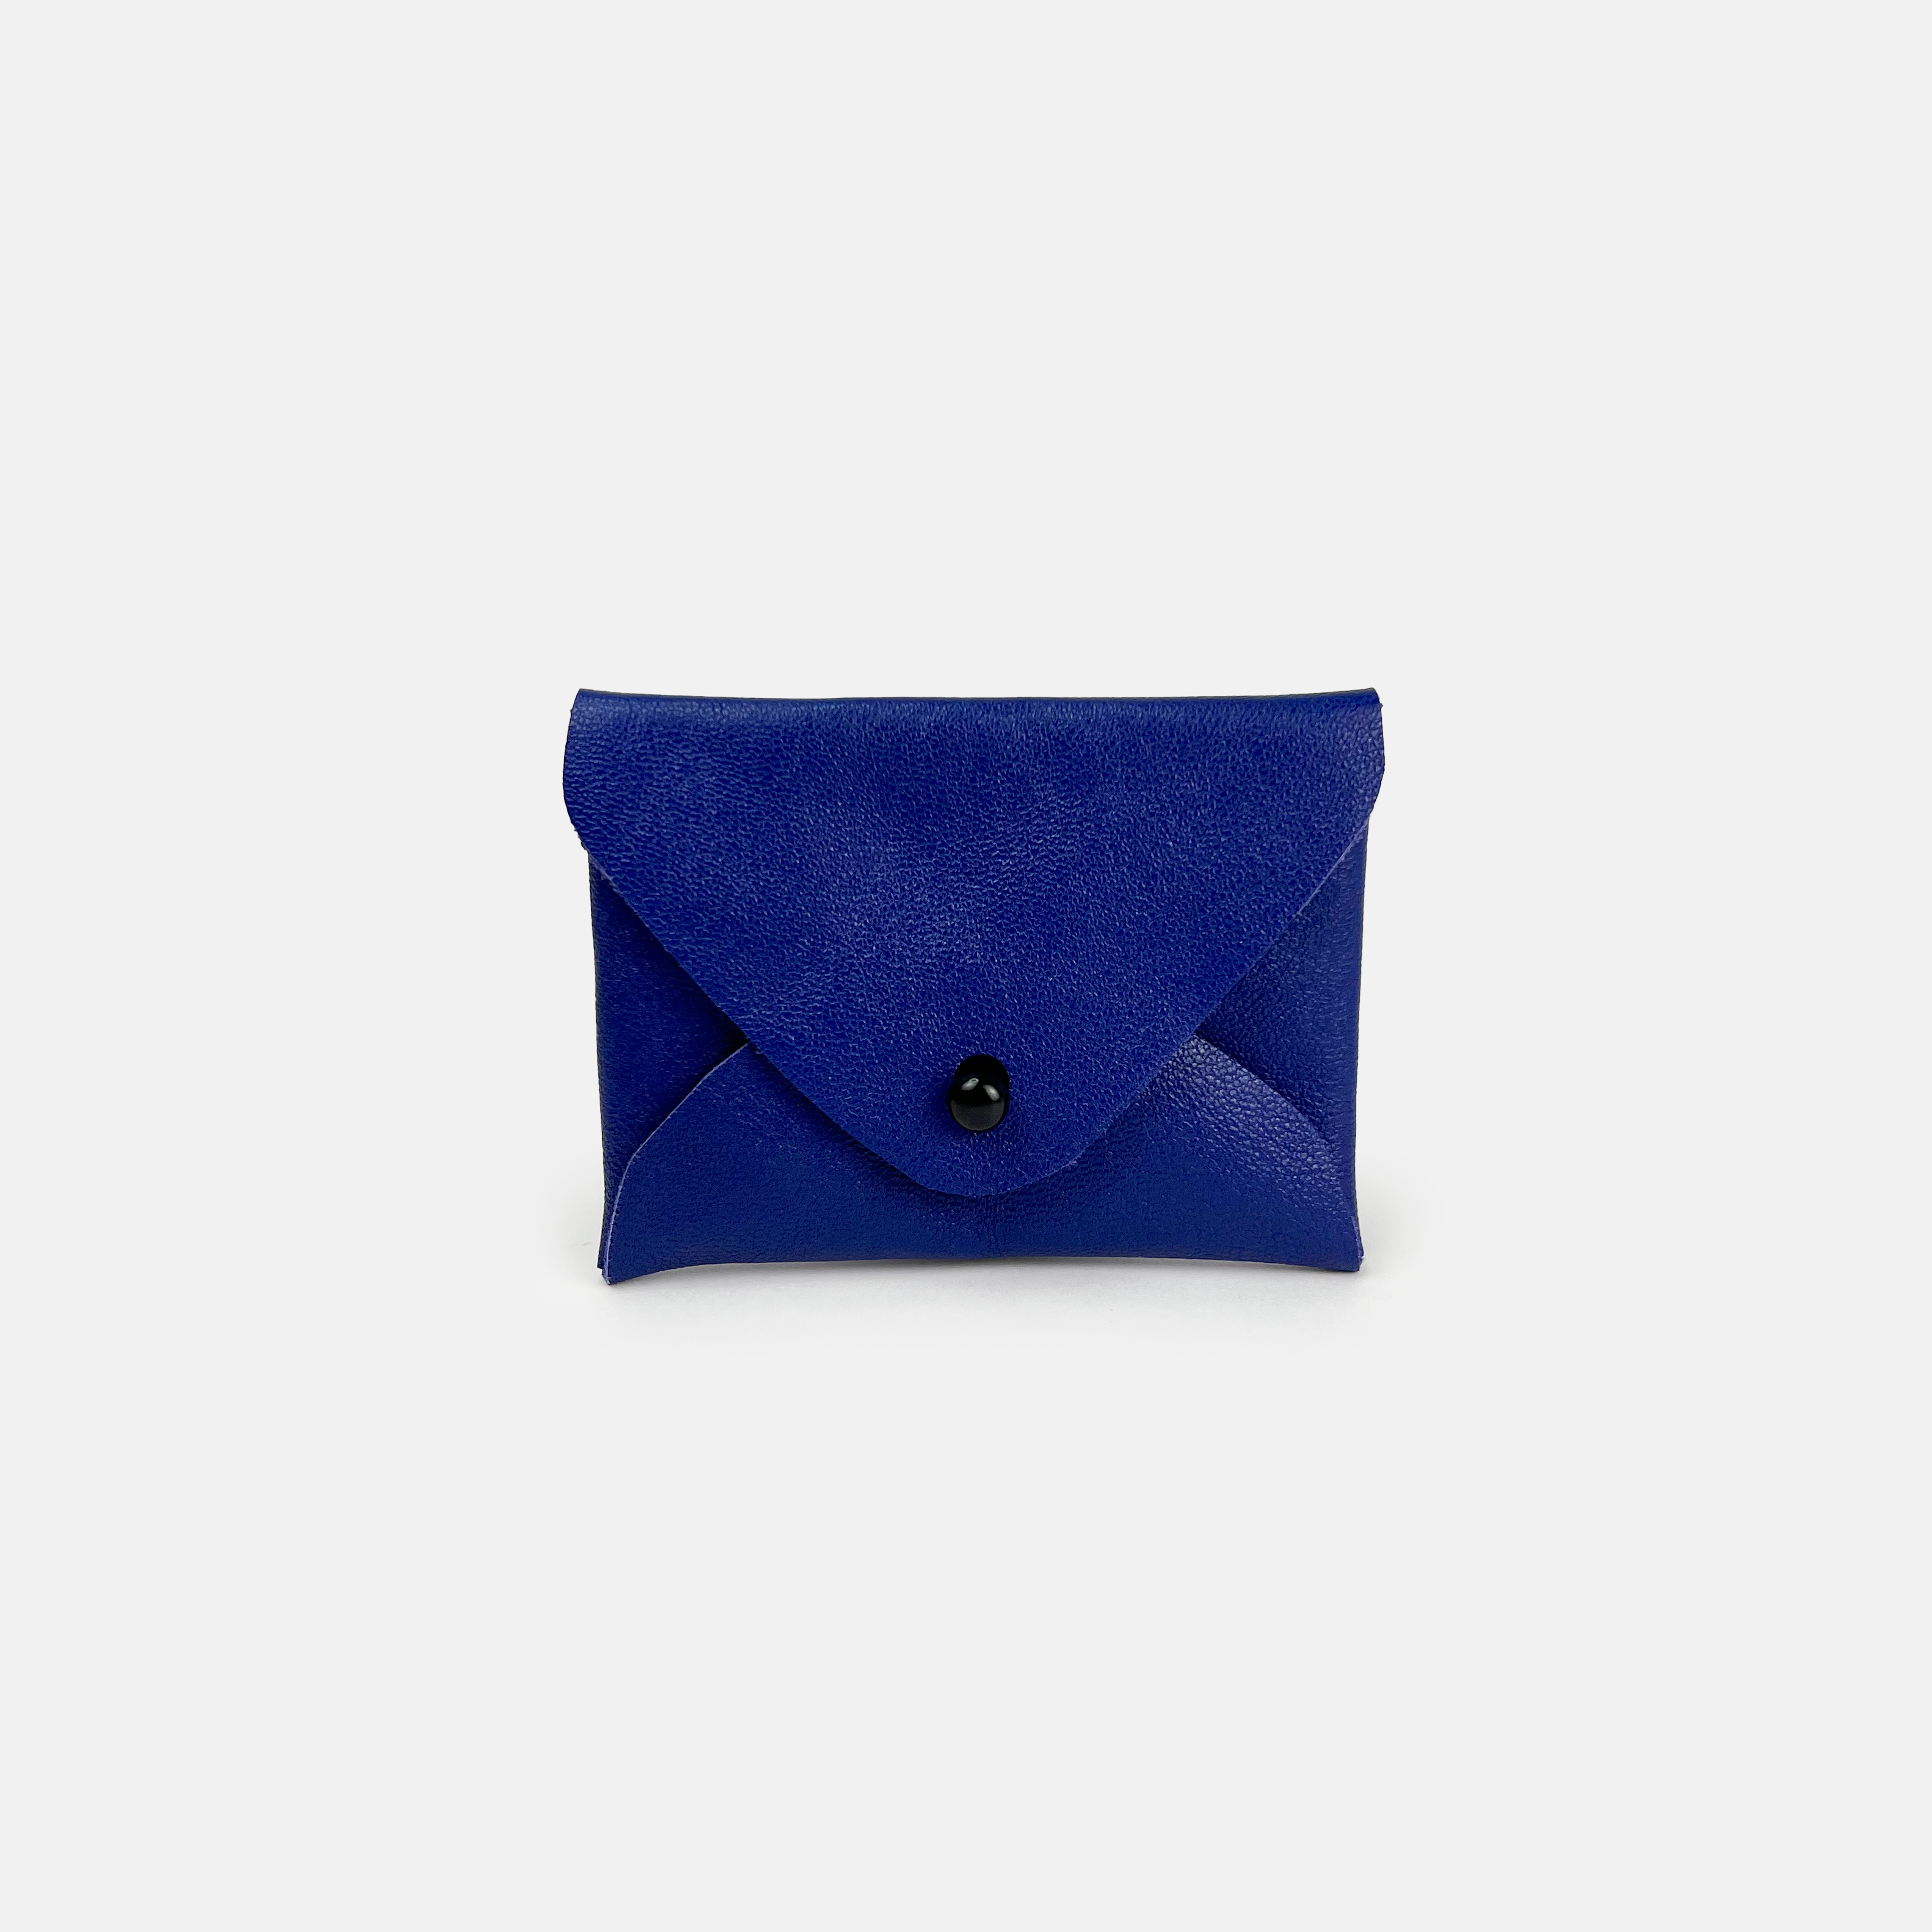 Blue Suede Leather Laptop Bag for Work with 15